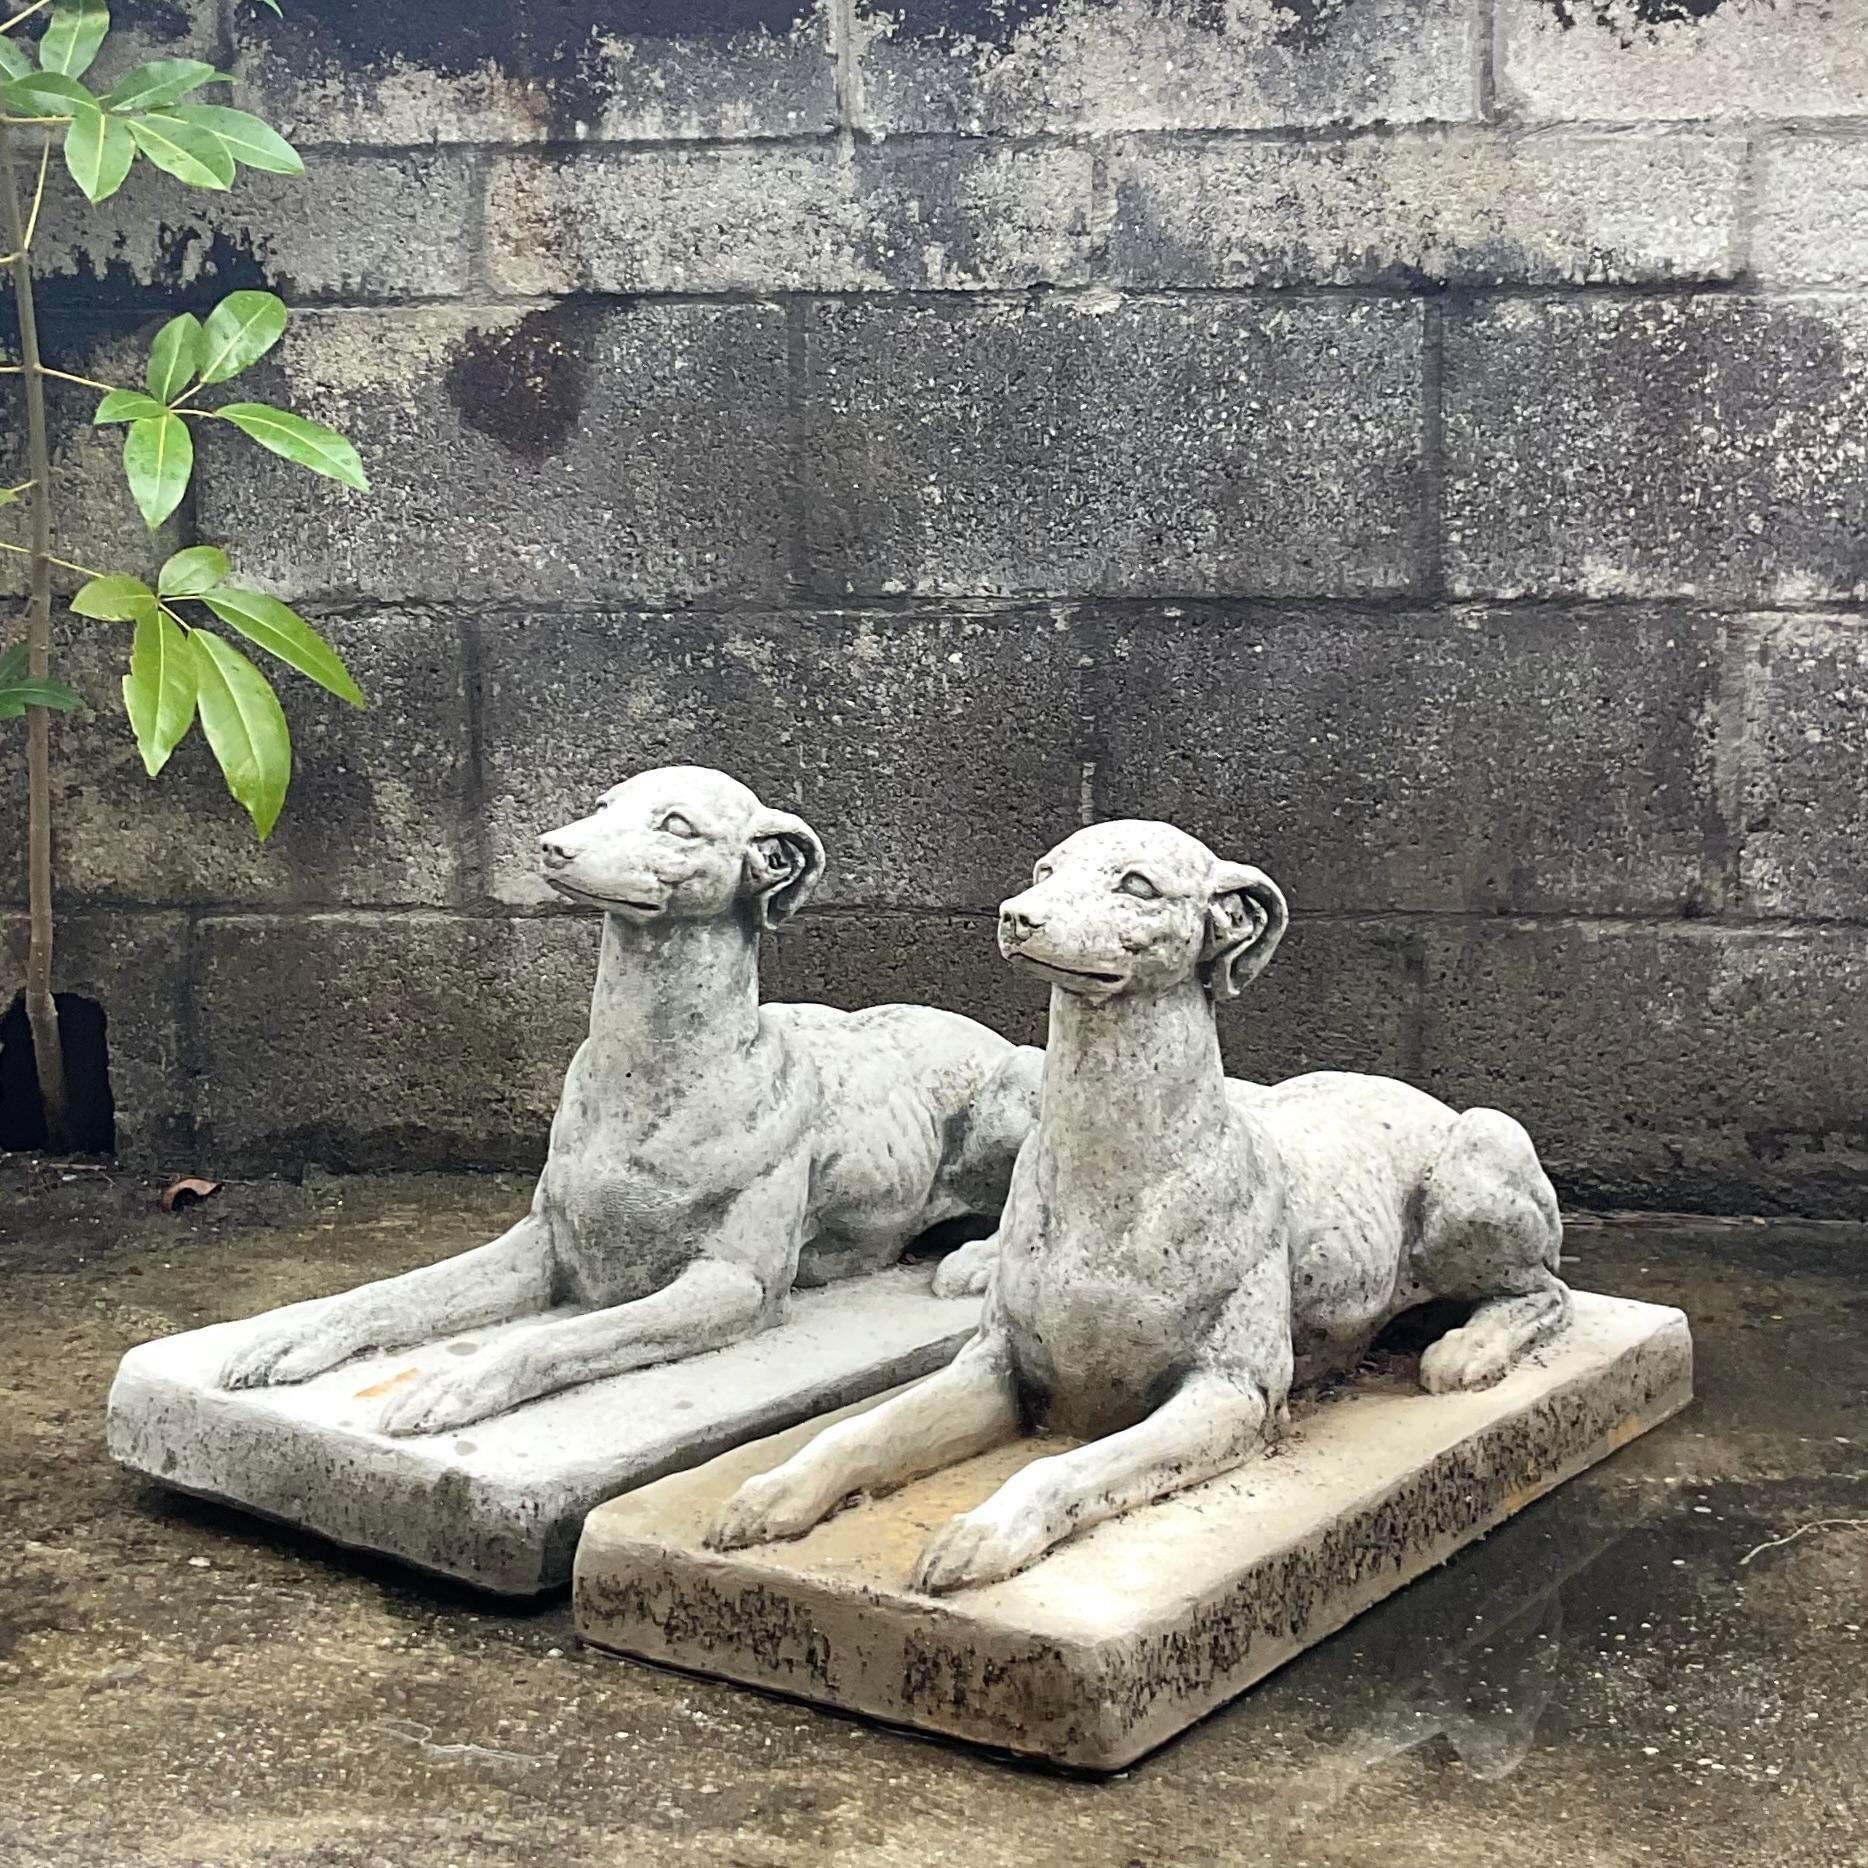 A spectacular pair of vintage Boho dogs. Two reclining Whippets in a cast concrete. Perfect indoors or standing guard in the garden. You decide! Acquired from a Palm Beach estate. 